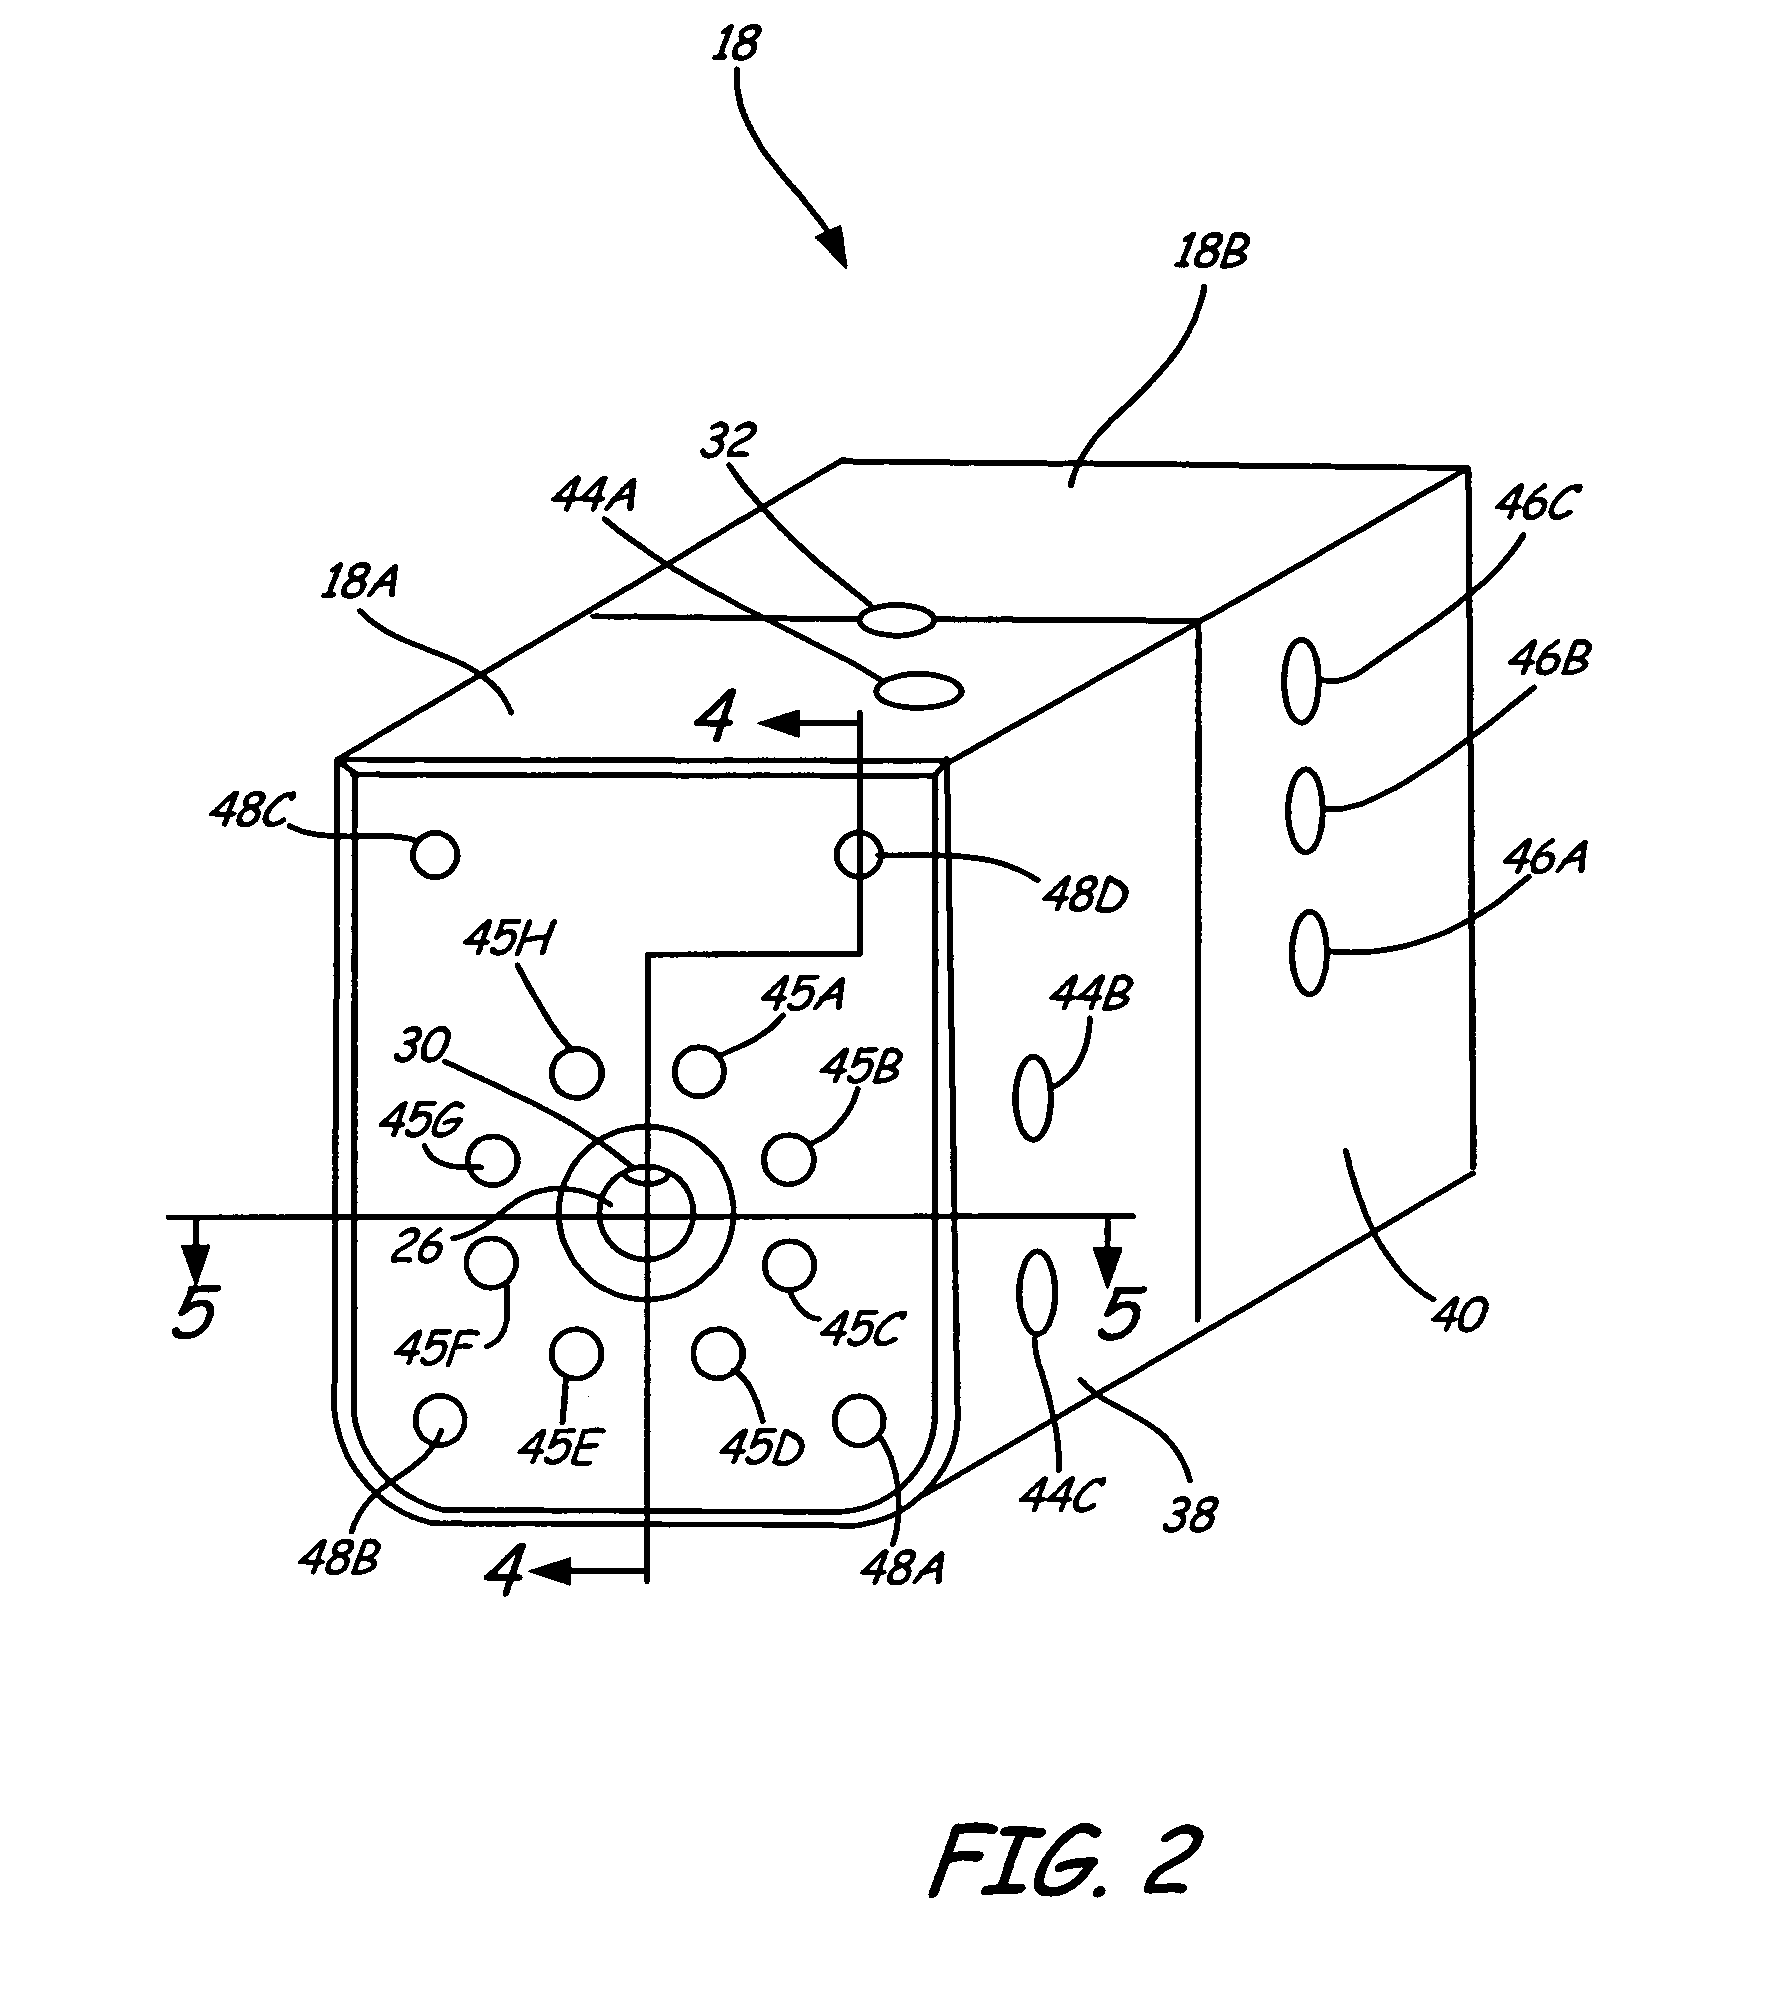 Single-piece cooling blocks for casting and molding